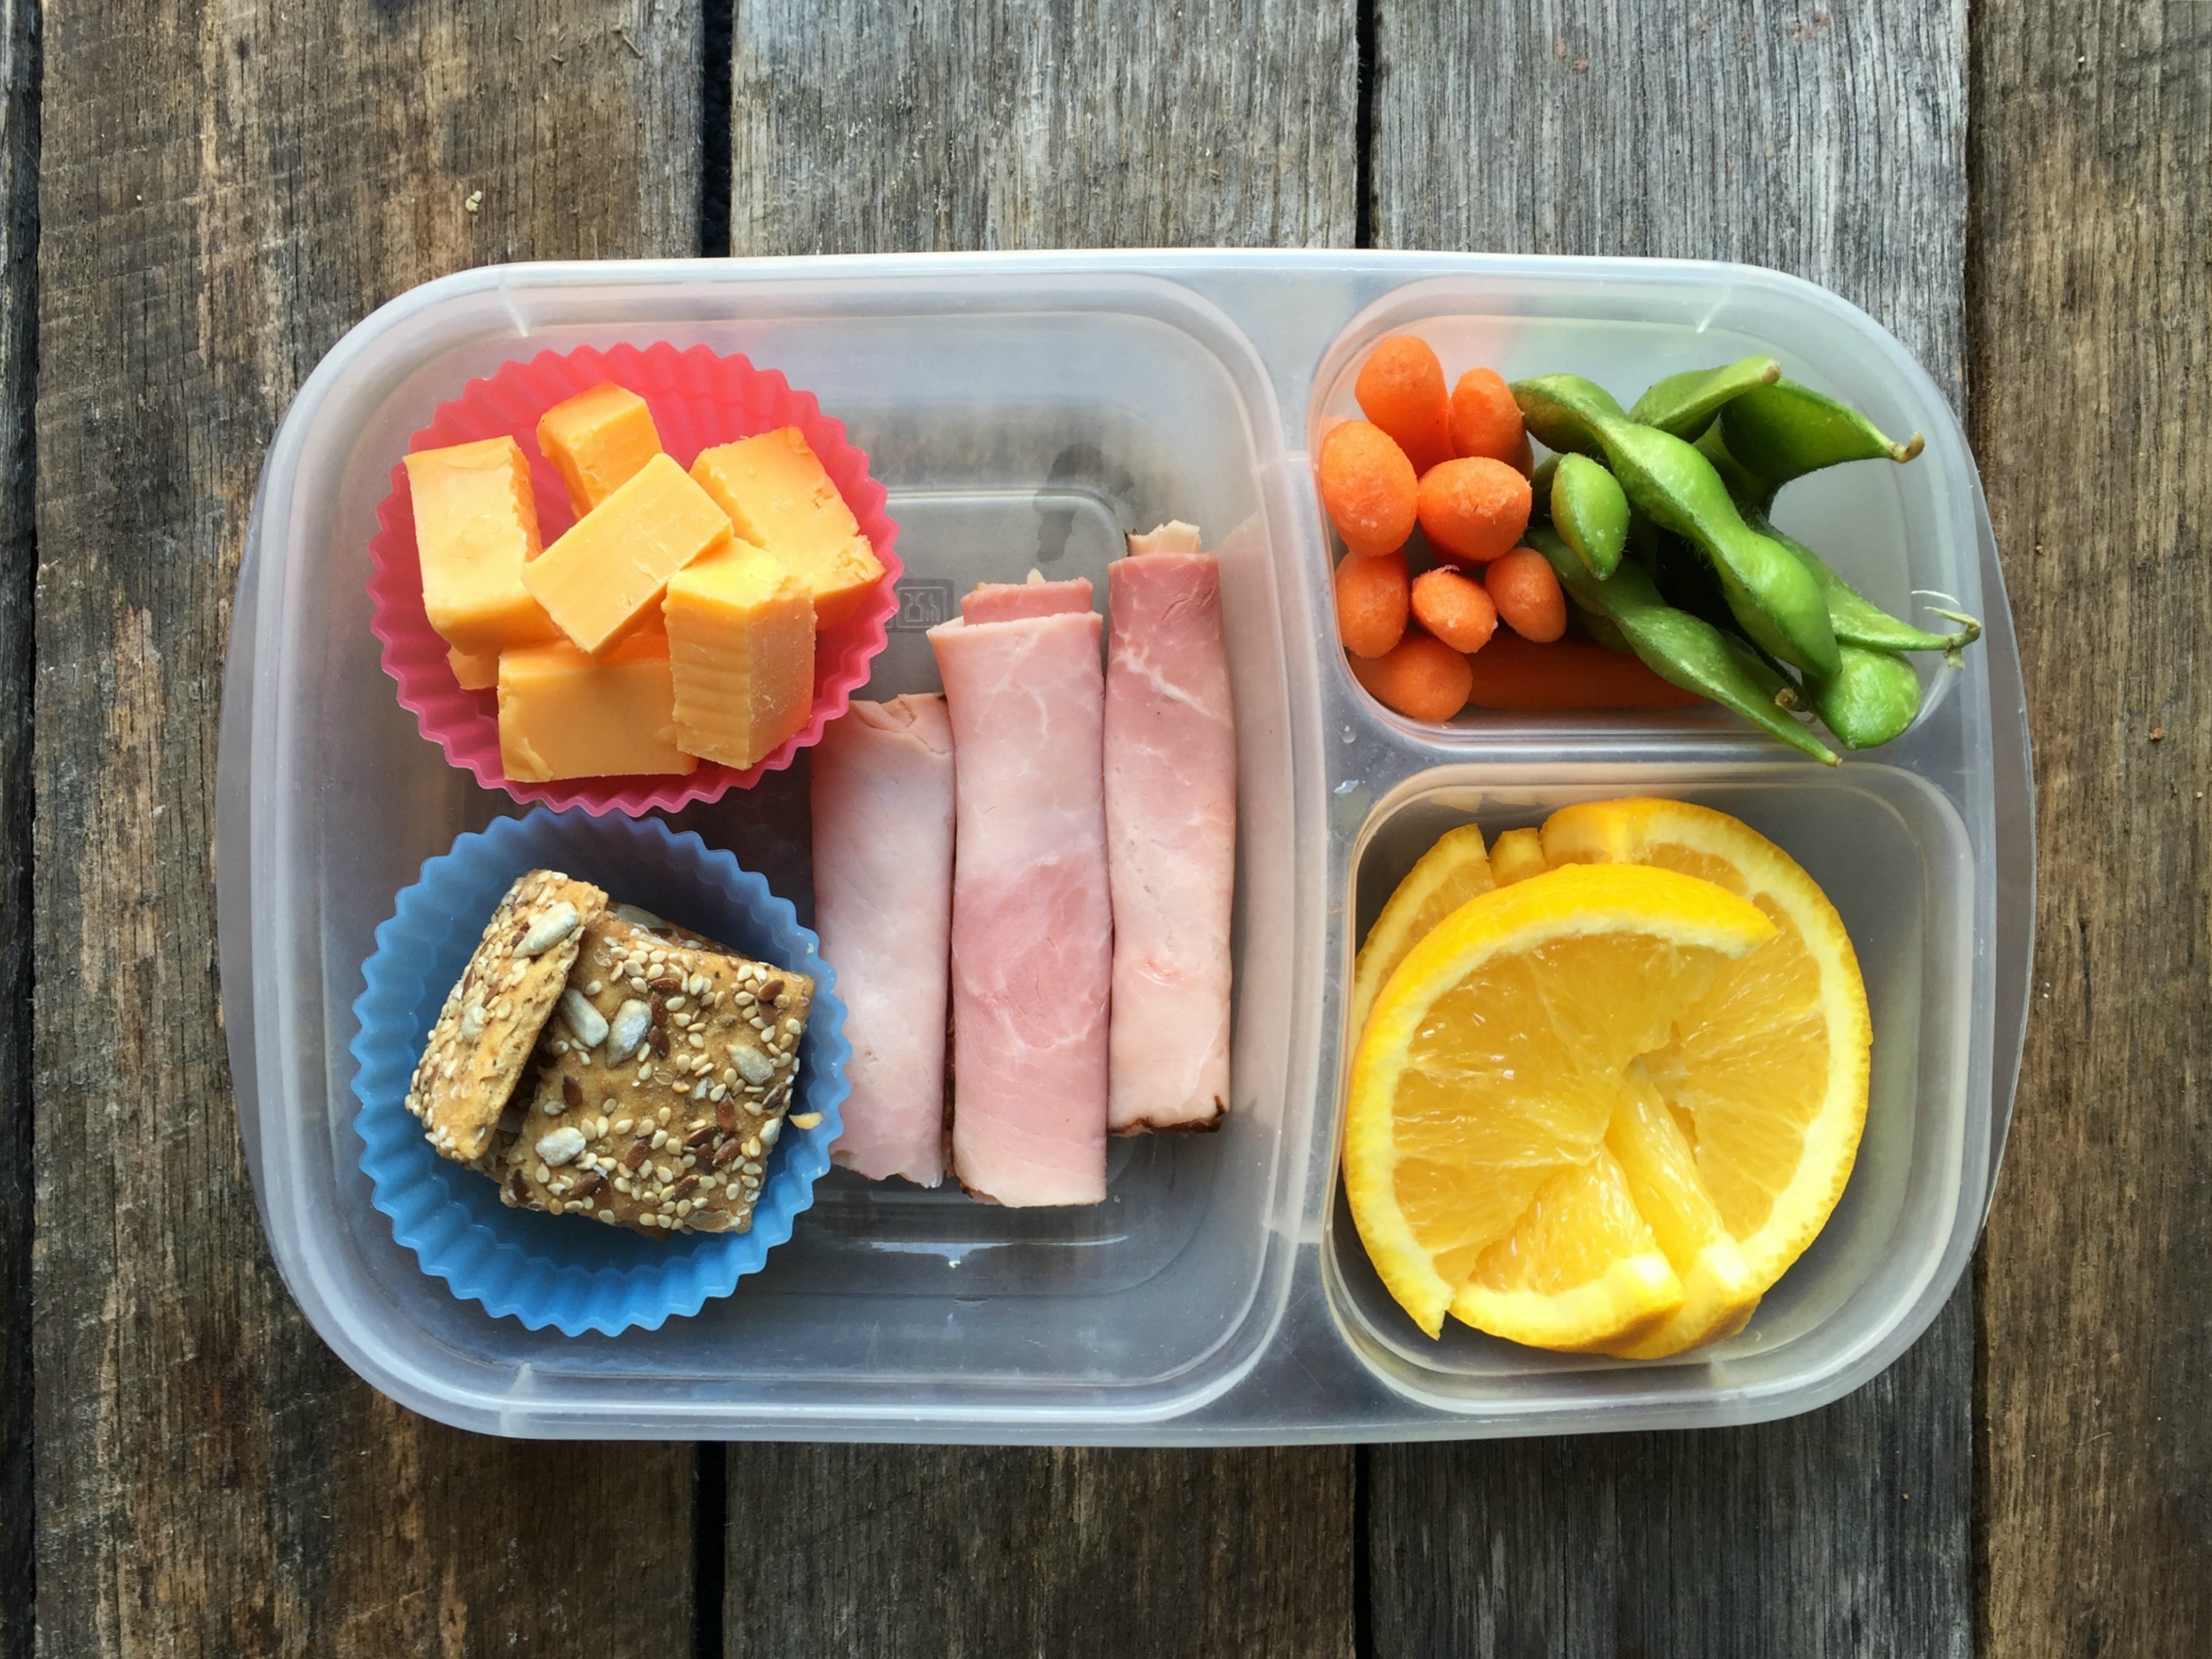 Five Secrets to Lunch Packing Success - Super Simple